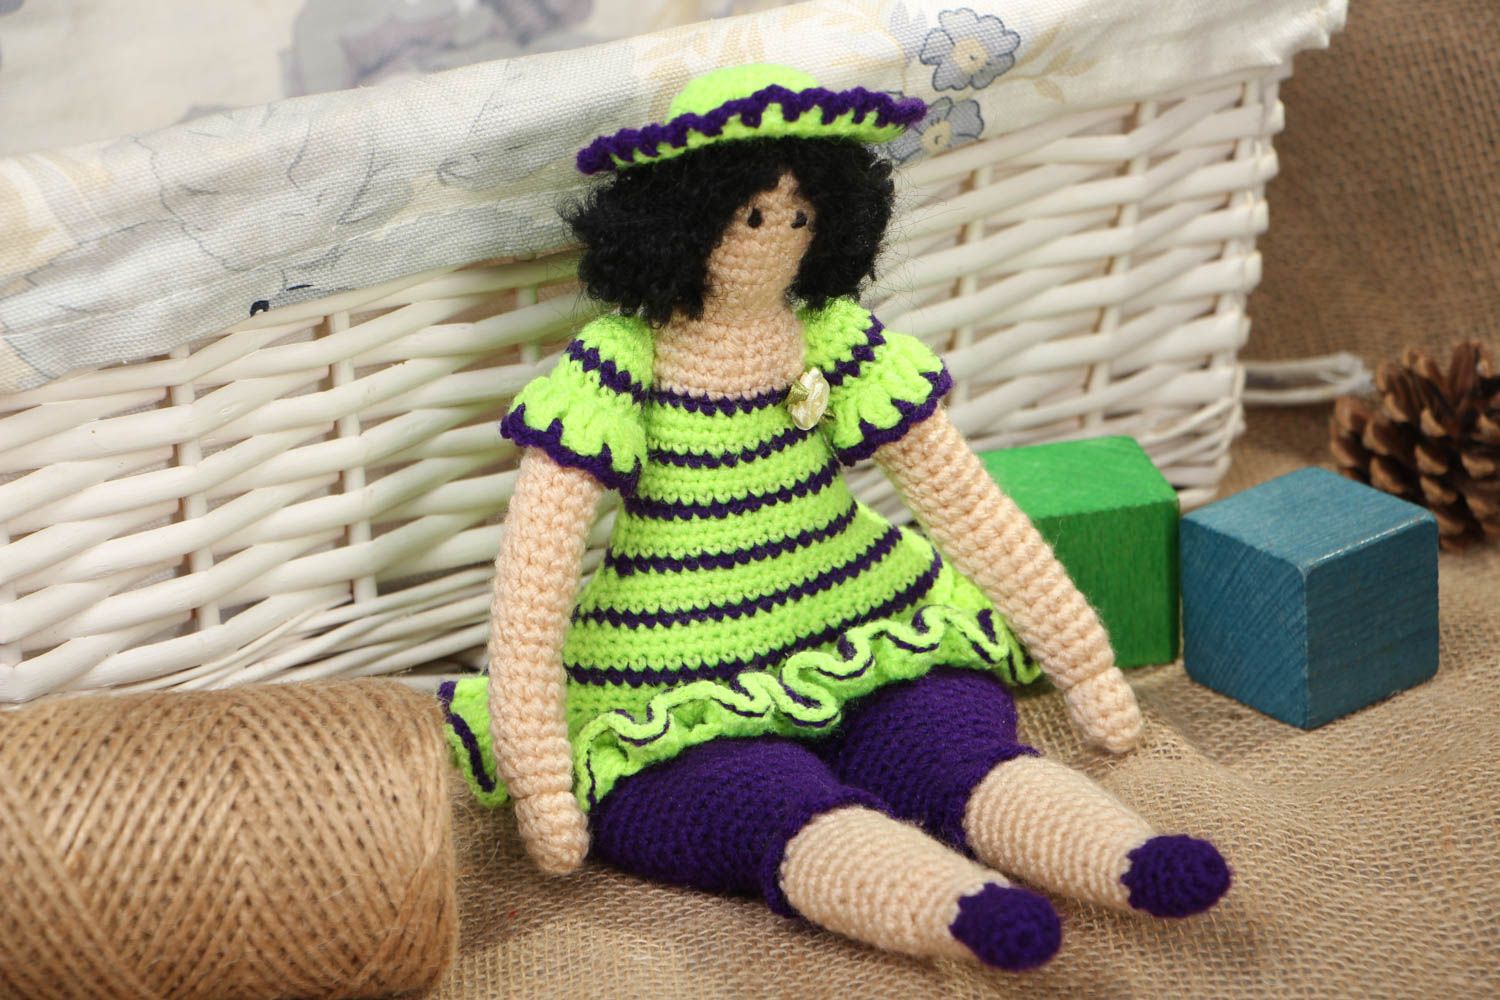 Soft crochet toy Lady with Hat photo 5